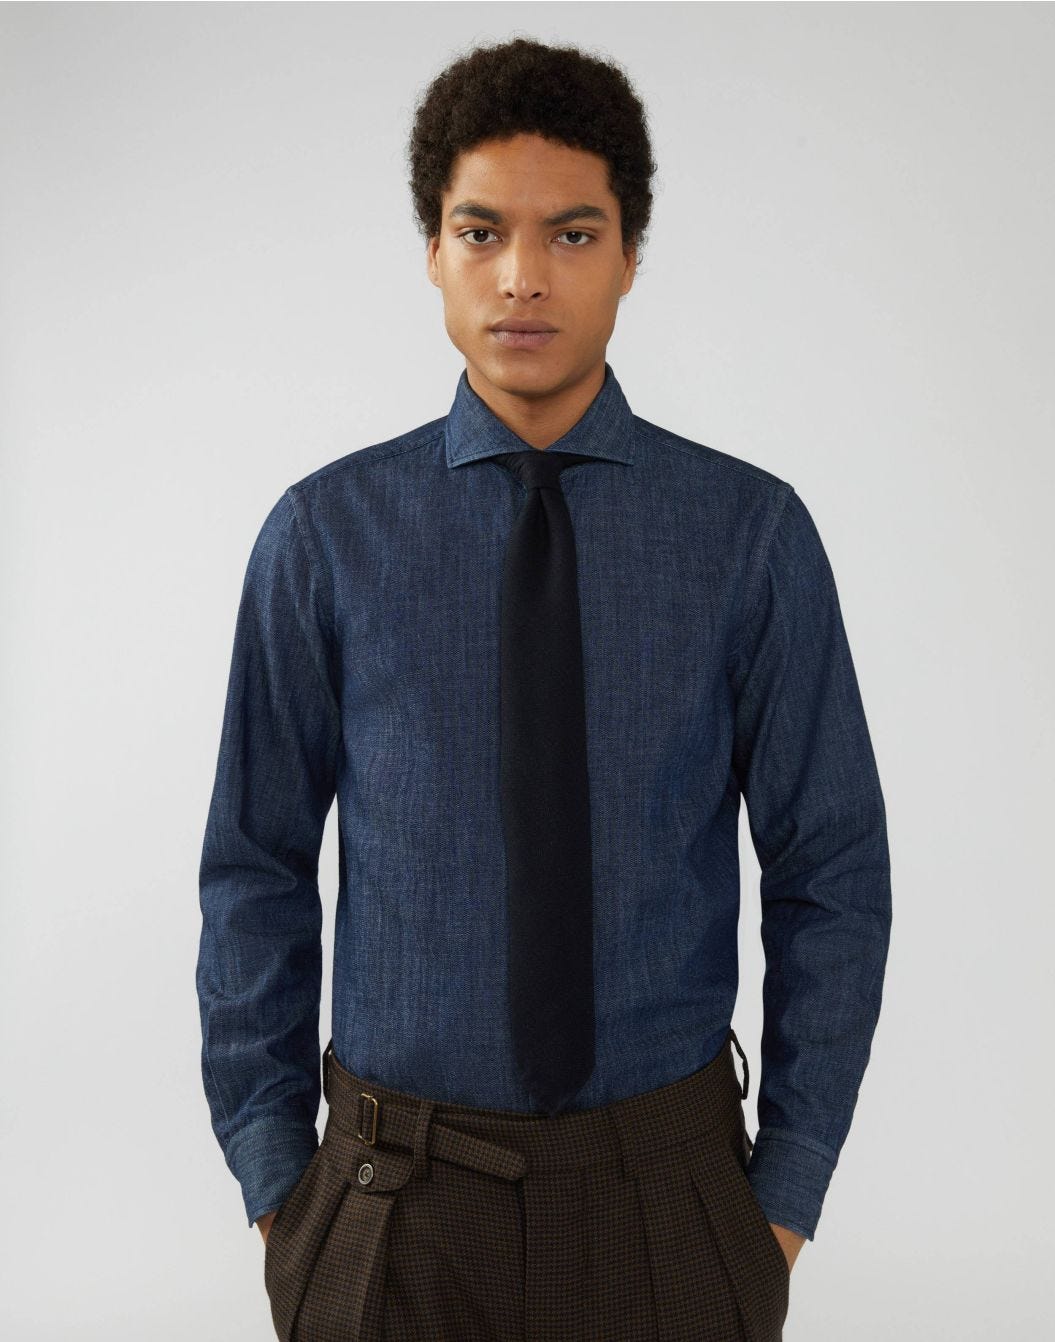 Unlined tie in fishbone-patterned cashmere